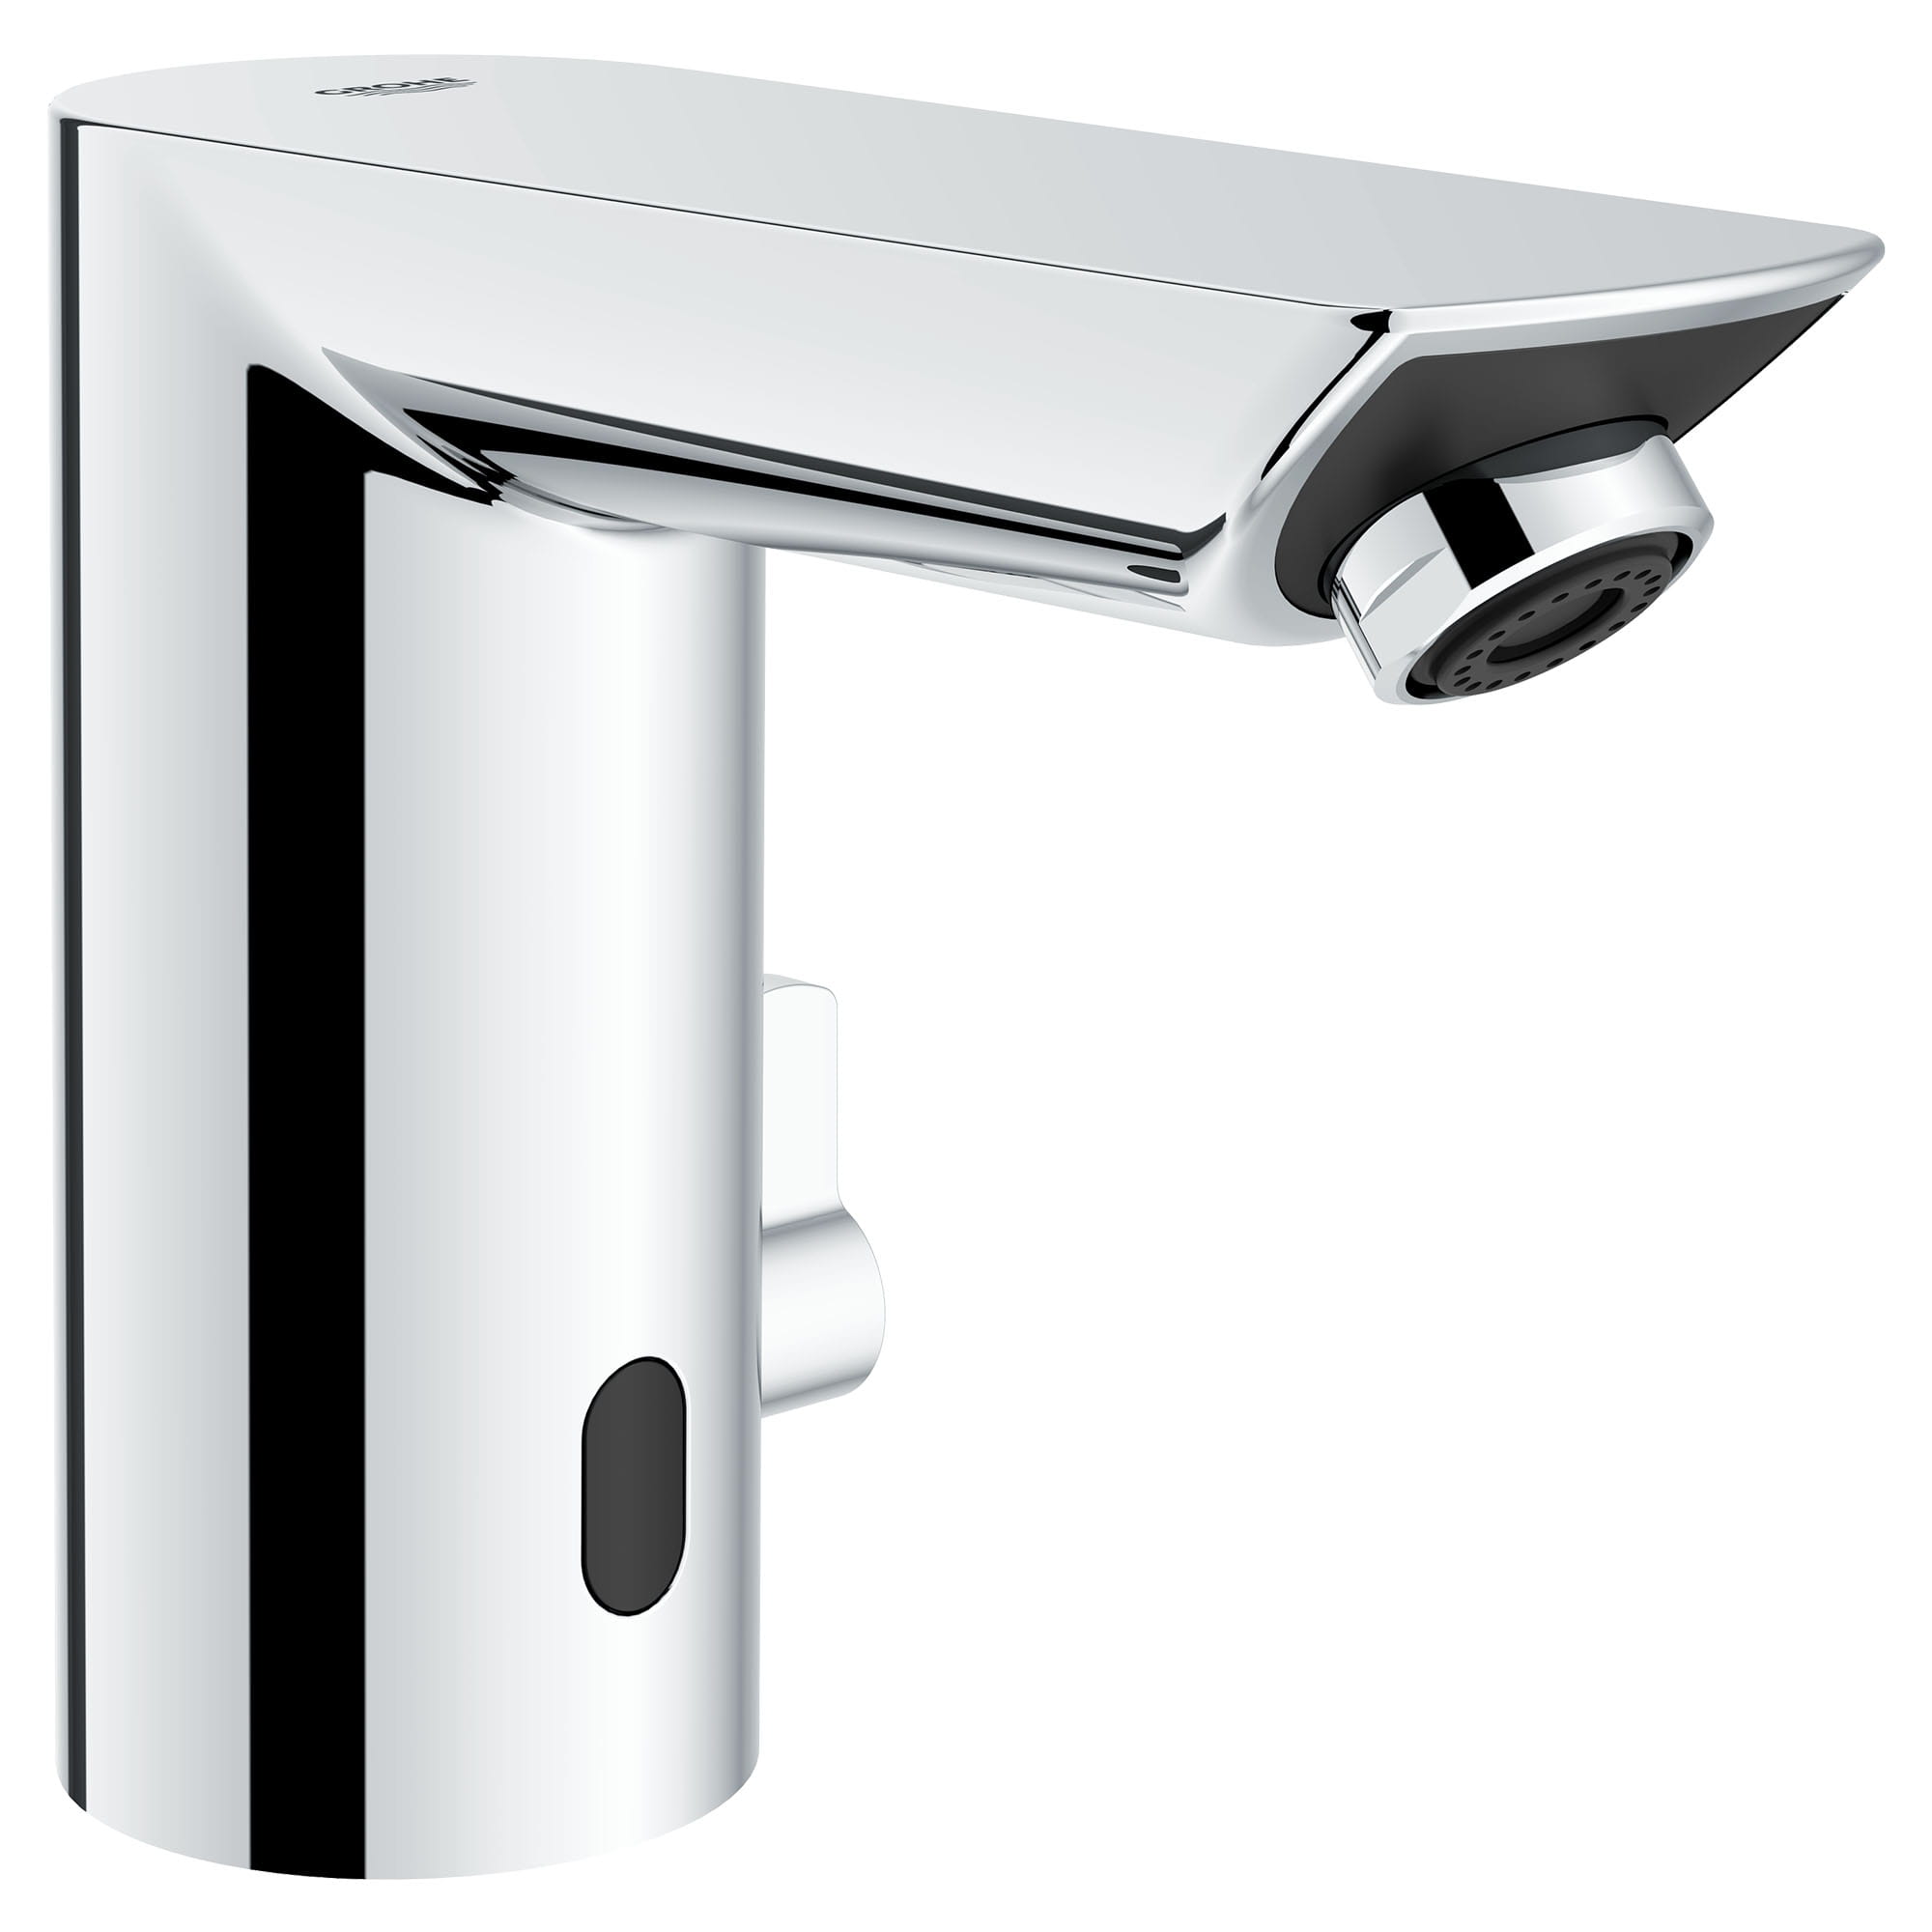 E Touchless Electronic Faucet with Temperature Control Lever Battery Powered GROHE CHROME